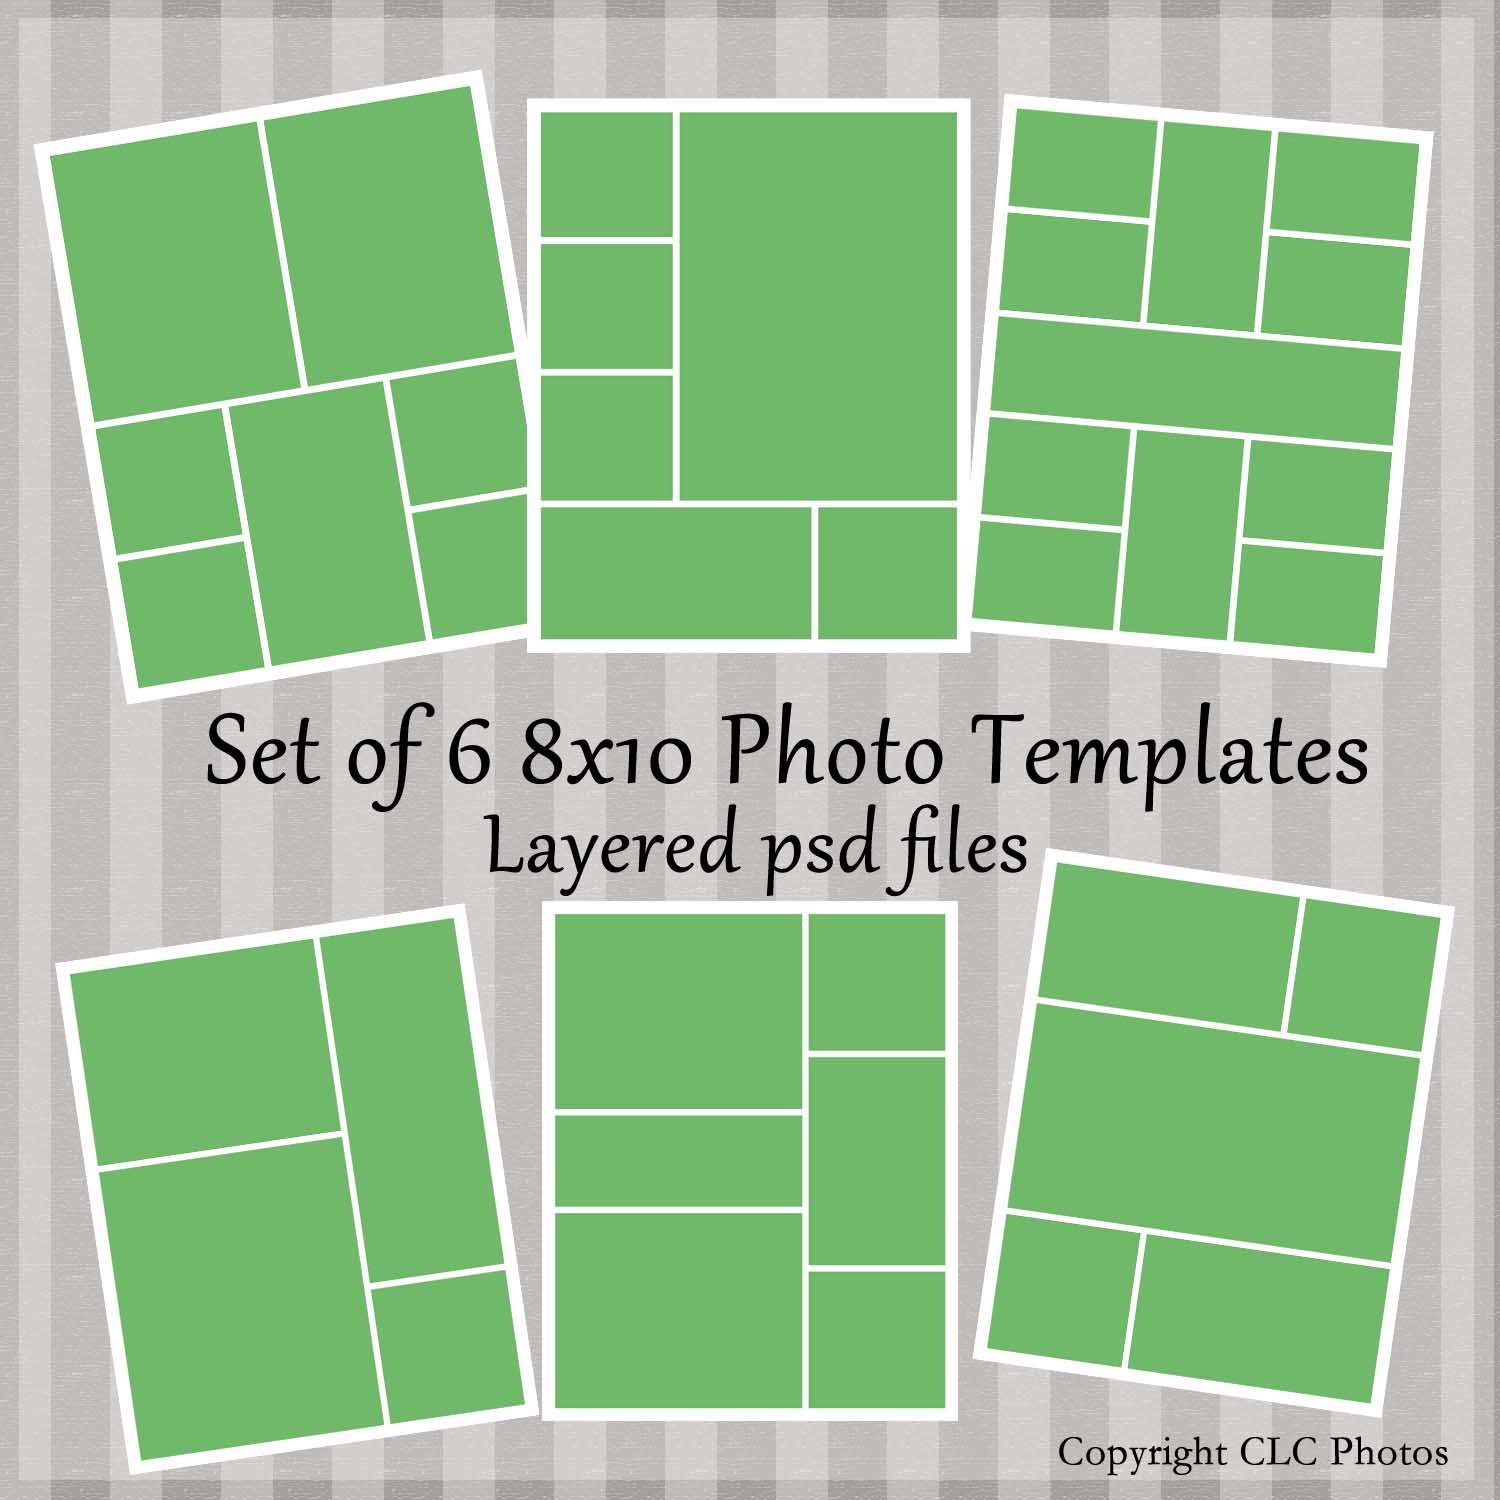 8x10 Template Collage Story Board Layered PSD Files Set